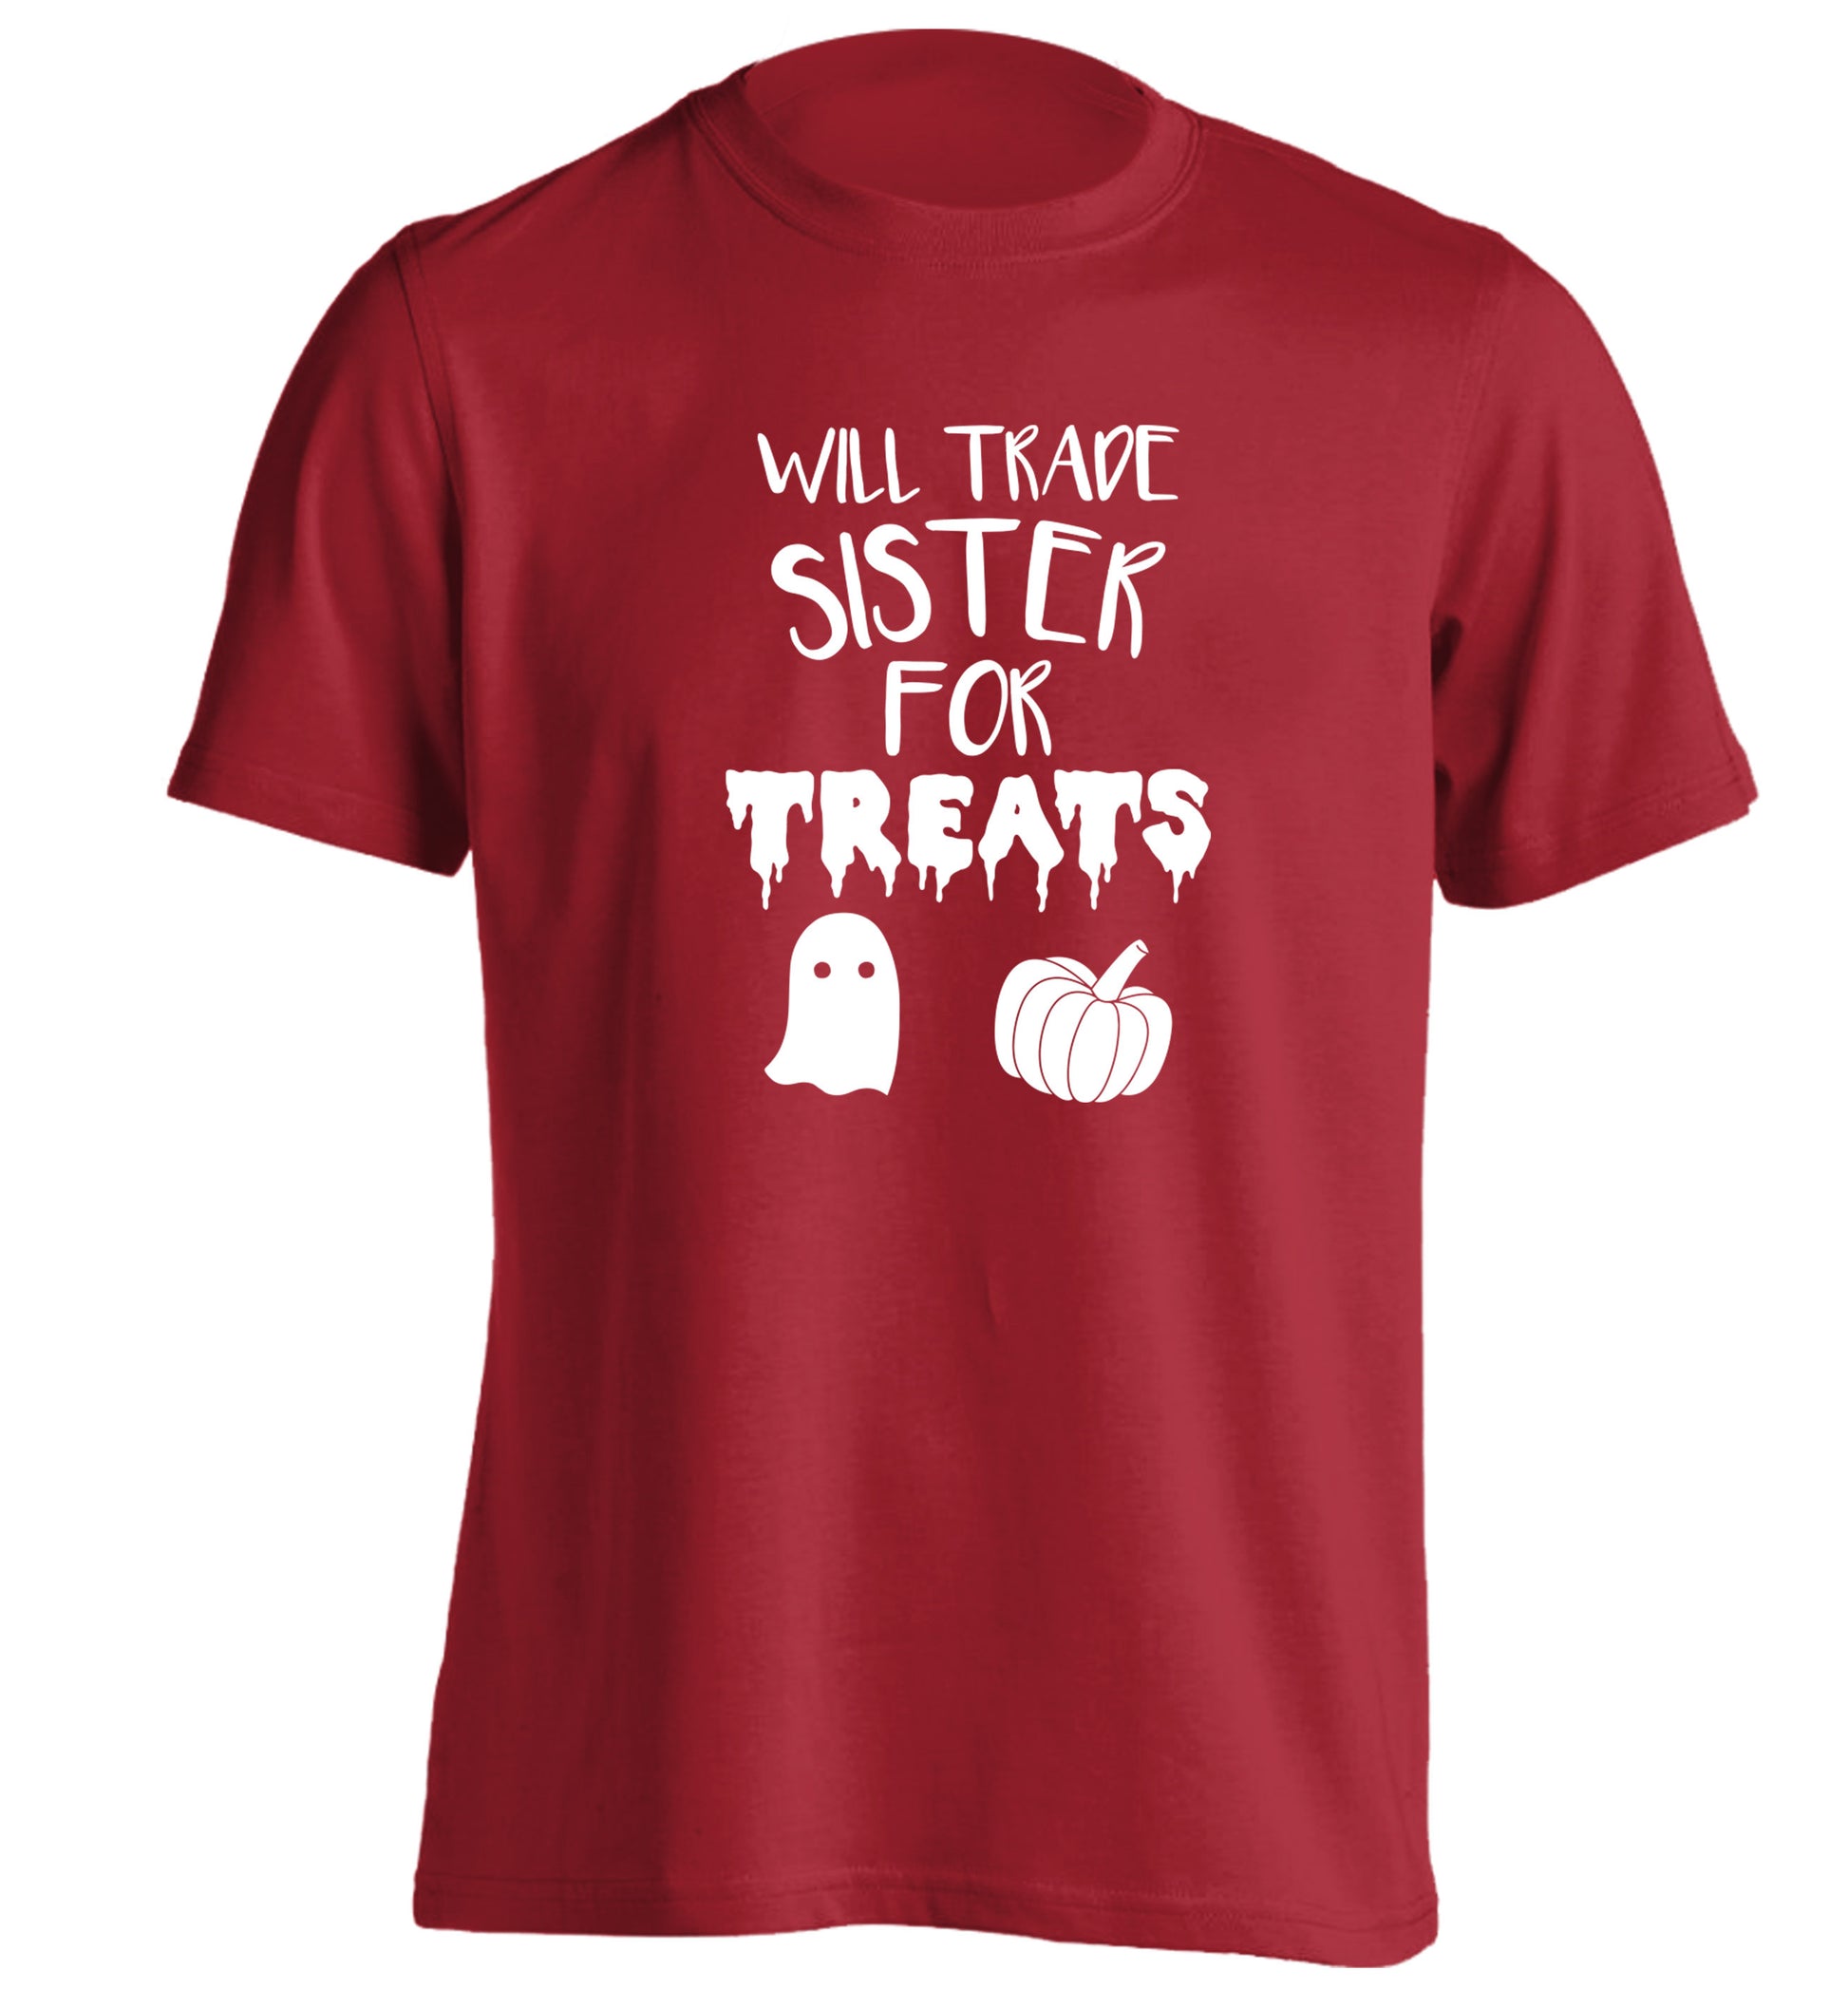 Will trade sister for treats adults unisex red Tshirt 2XL